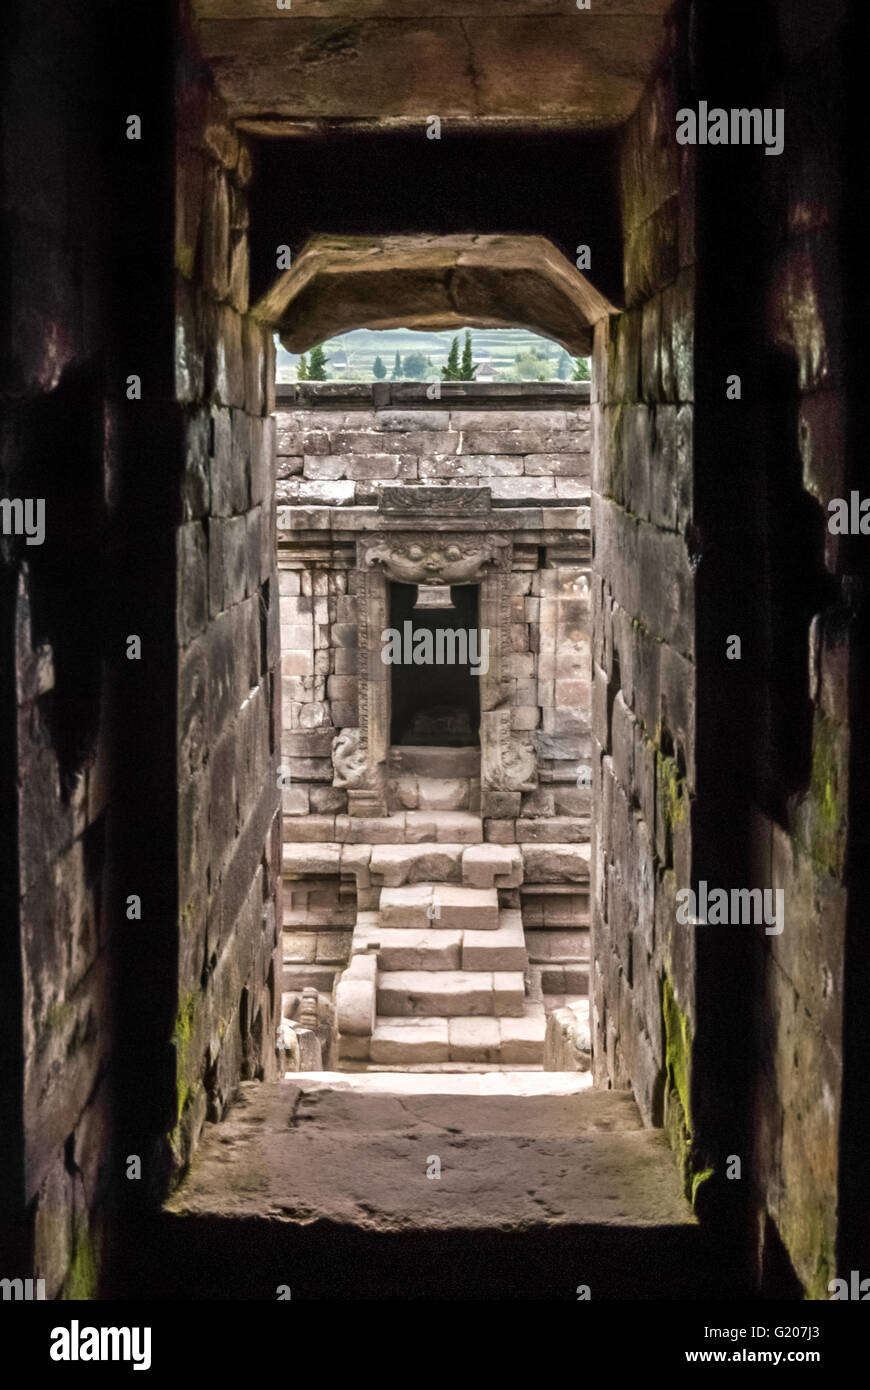 View from inside one of the temples at Arjuna temple compound on Dieng Plateau, administratively located in Banjarnegara, Central Java, Indonesia. Stock Photo